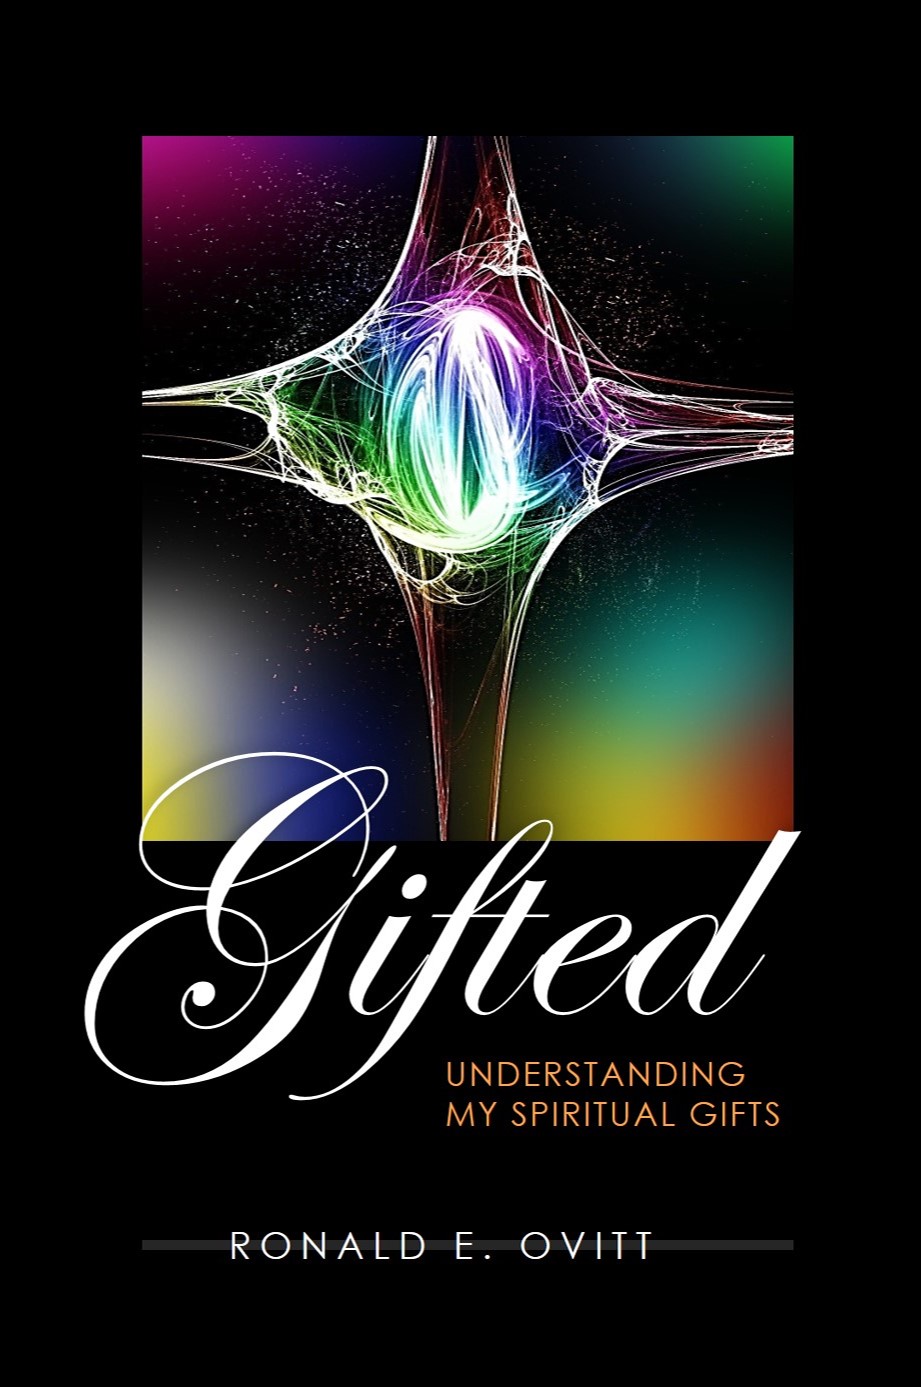 Cover of the book "Gifted: Understanding Your Spiritual Gifts"